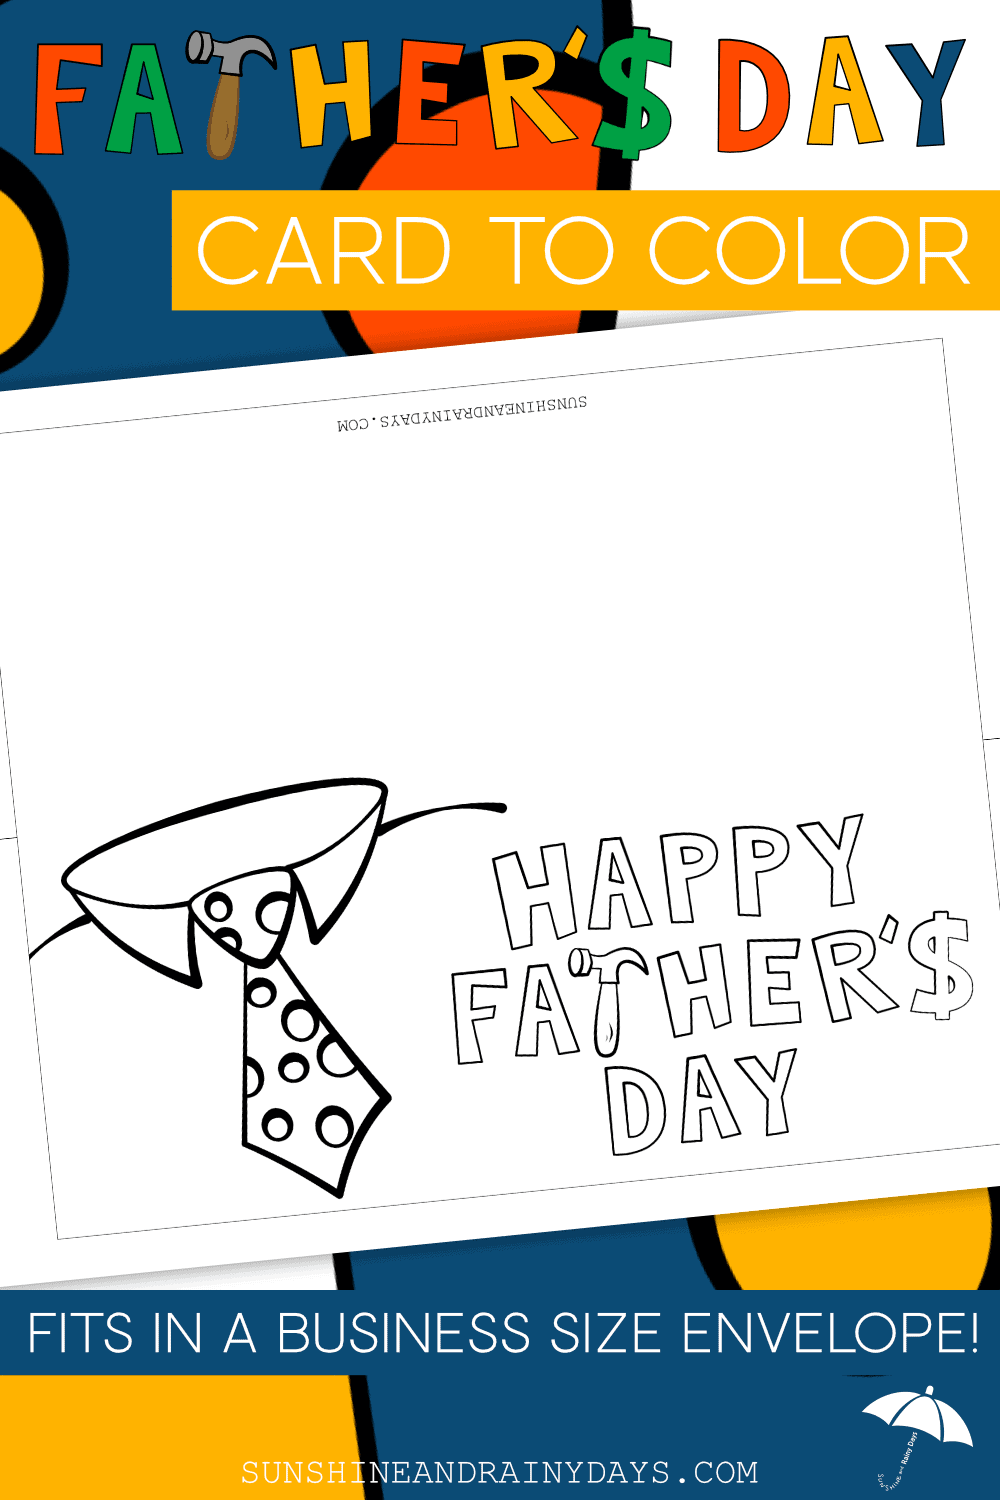 Printable Father's Day Card To Color that says Happy Father's Day with a picture of a shirt and tie!